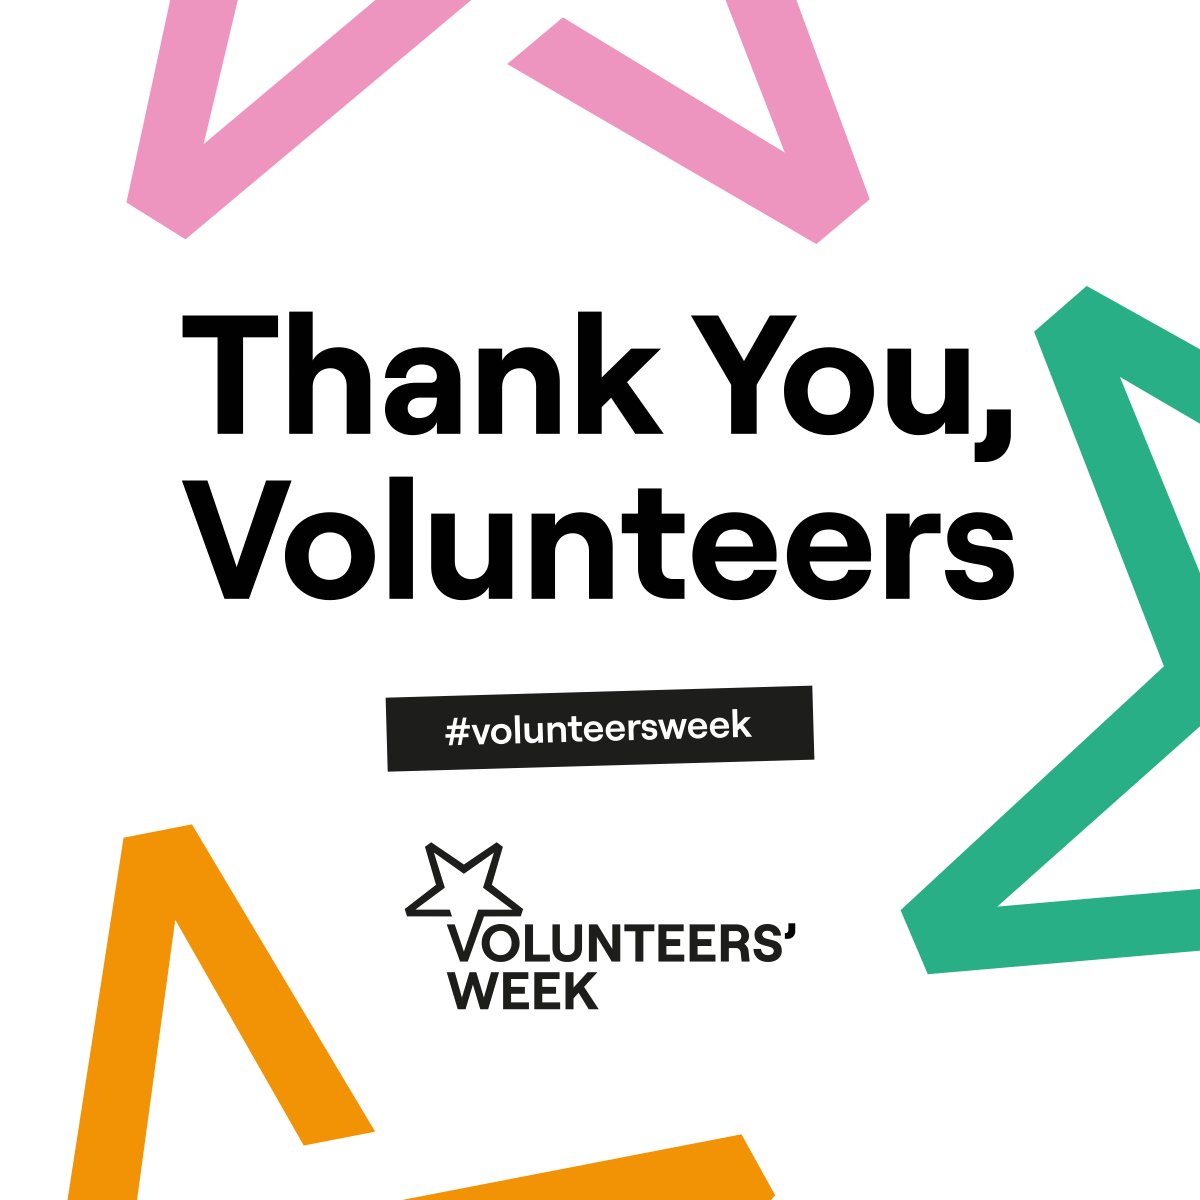 Happy Volunteers’ Week everyone! Join us as we celebrate and say a massive thank you to every single one of our brilliant volunteers. Our libraries couldn’t deliver these amazing services without our hardworking team of volunteers 🌟